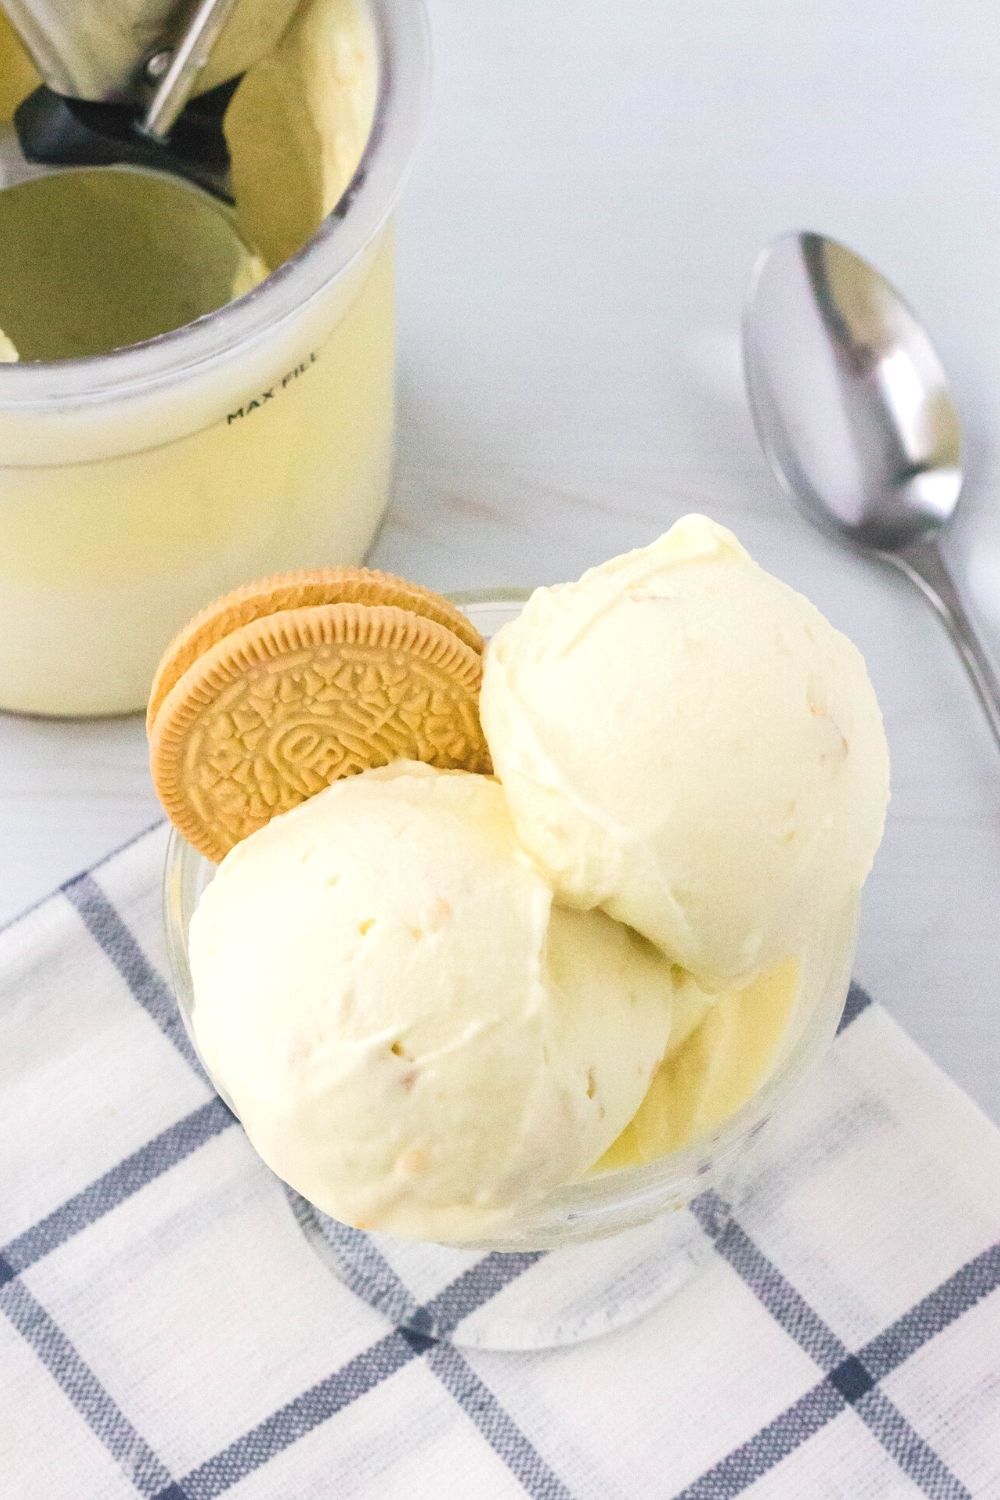 a glass dessert cup serves scoops of Ninja Creami lemon cookie ice cream. The pint of ice cream and a spoon are in the background.